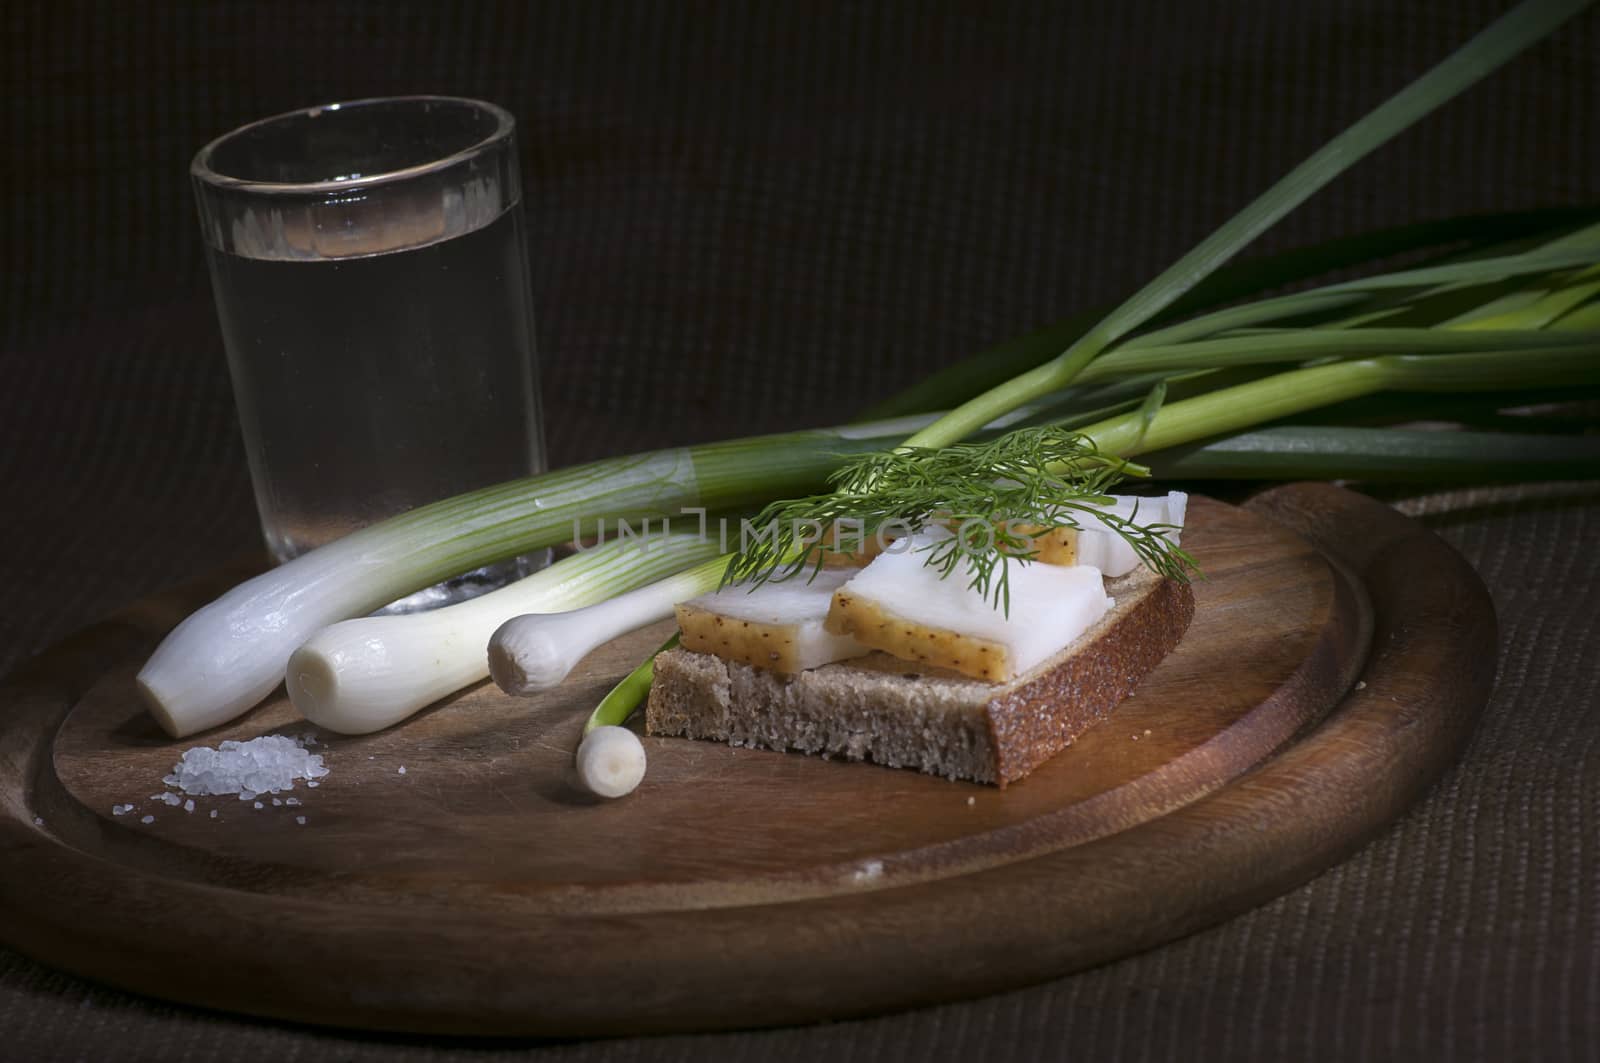 Sandwich with salted lard on rye bread served with vodka, green onion and garlic